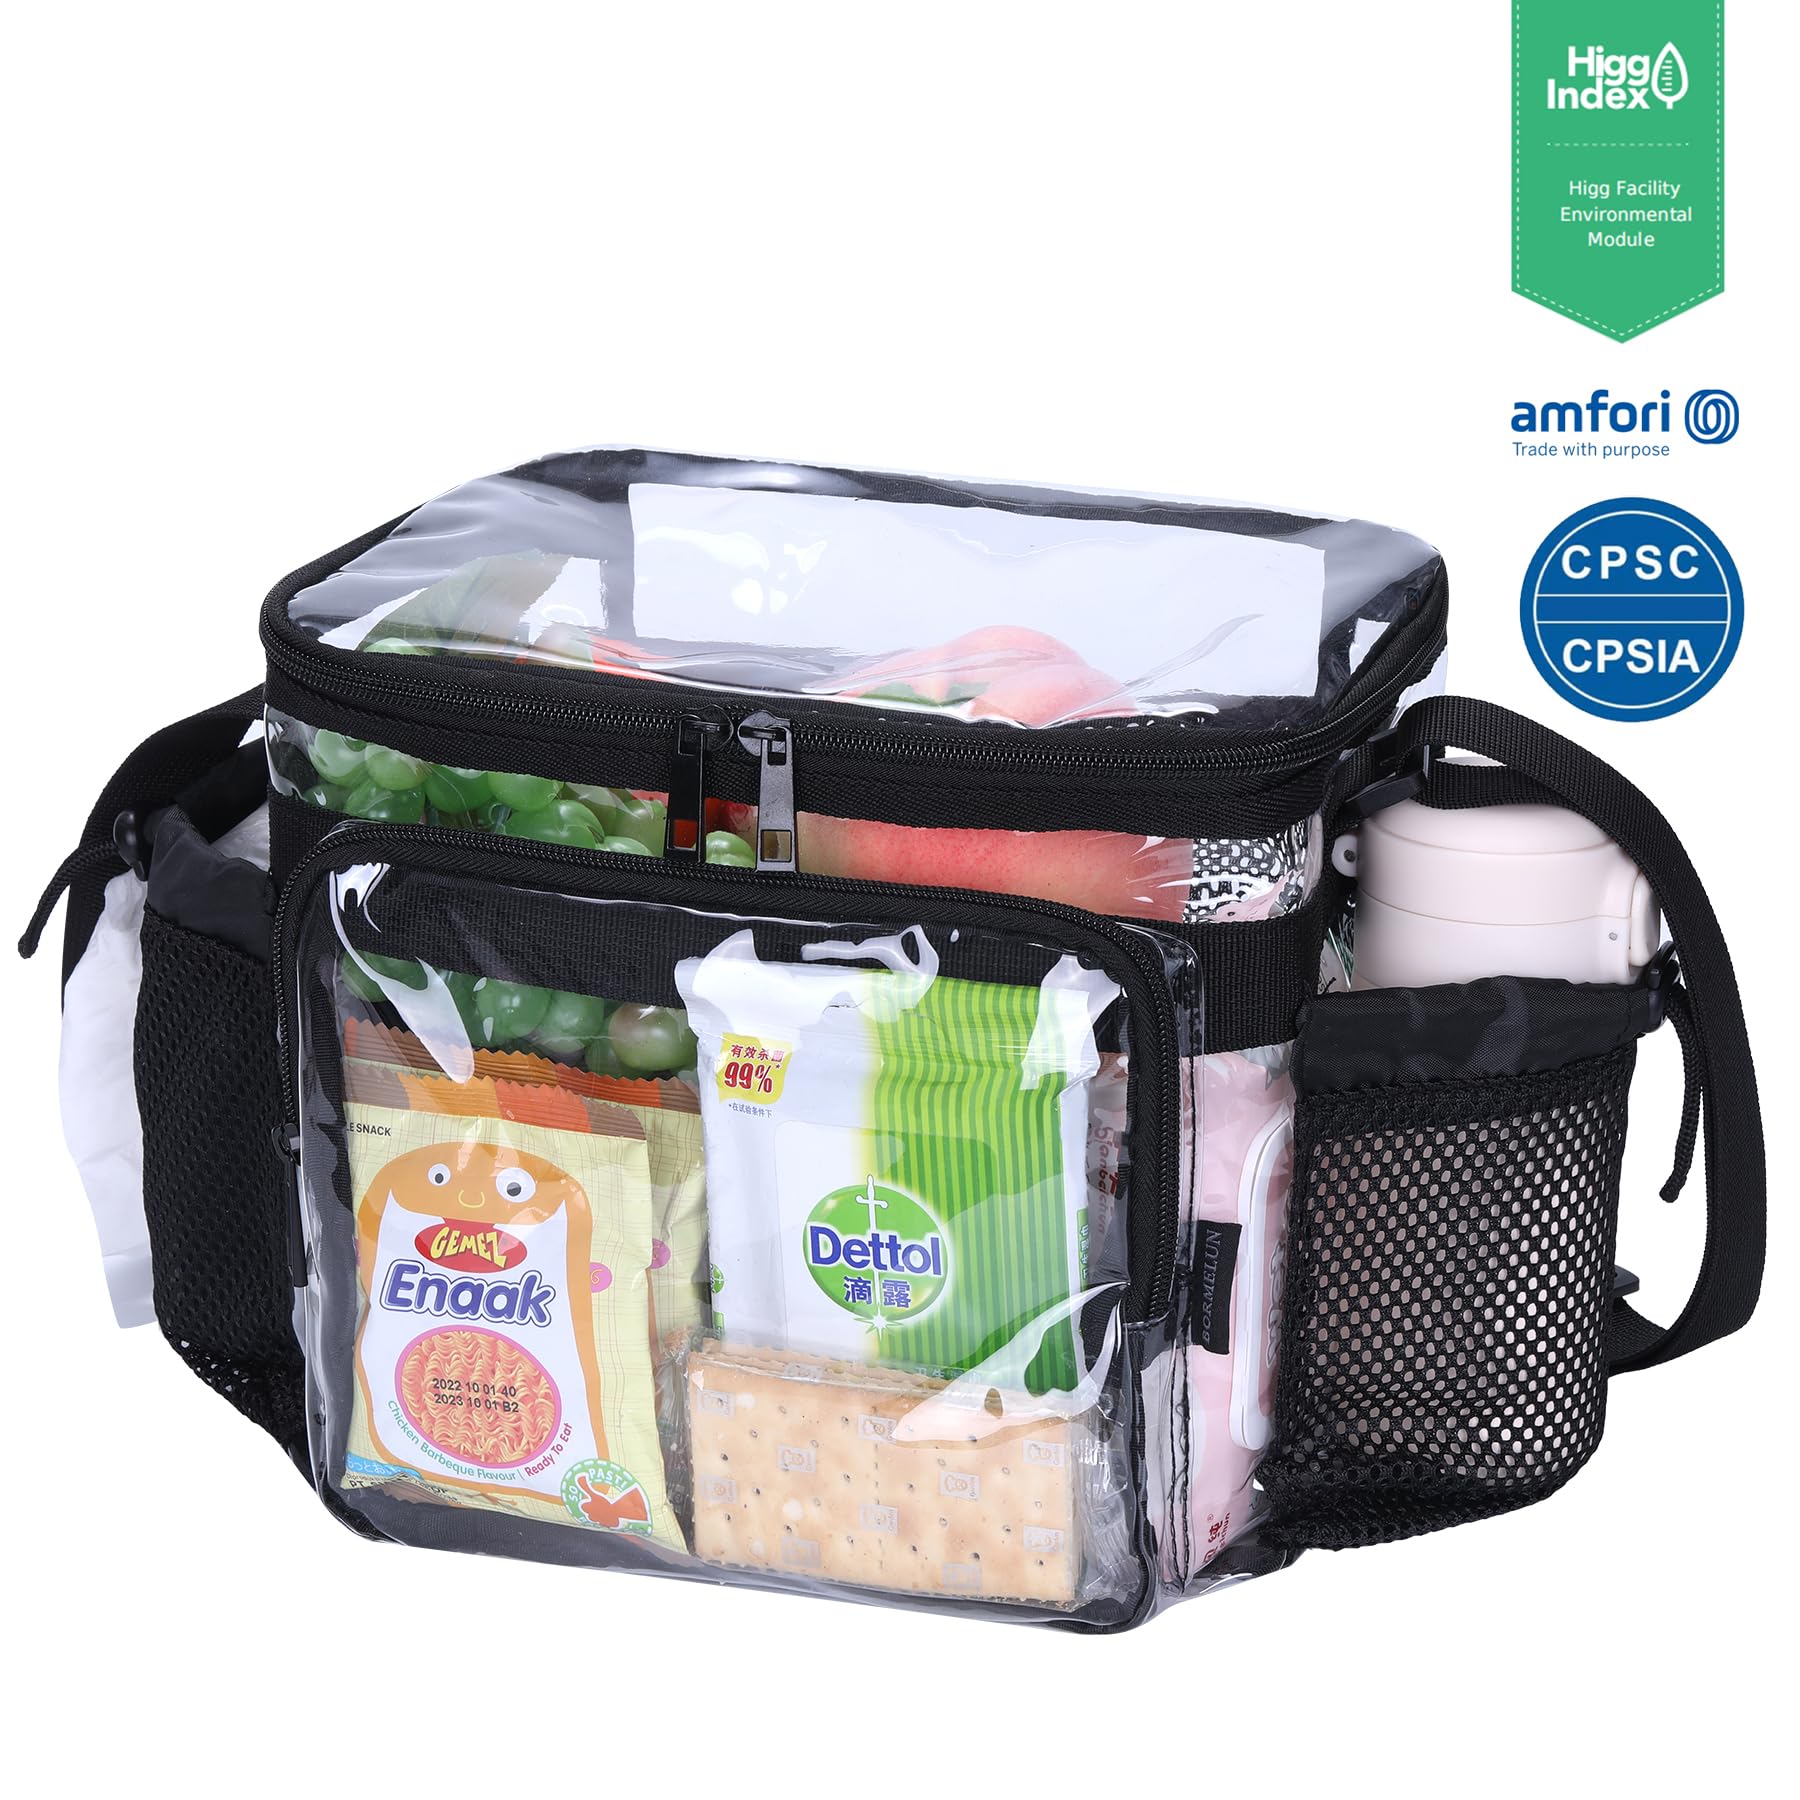 BORMELUN Stadium Approved Clear Lunch Bag - Heavy Duty, Large Transparent Clear Lunch Box for Men & Women, Ideal for Work and Correctional Officers(black)